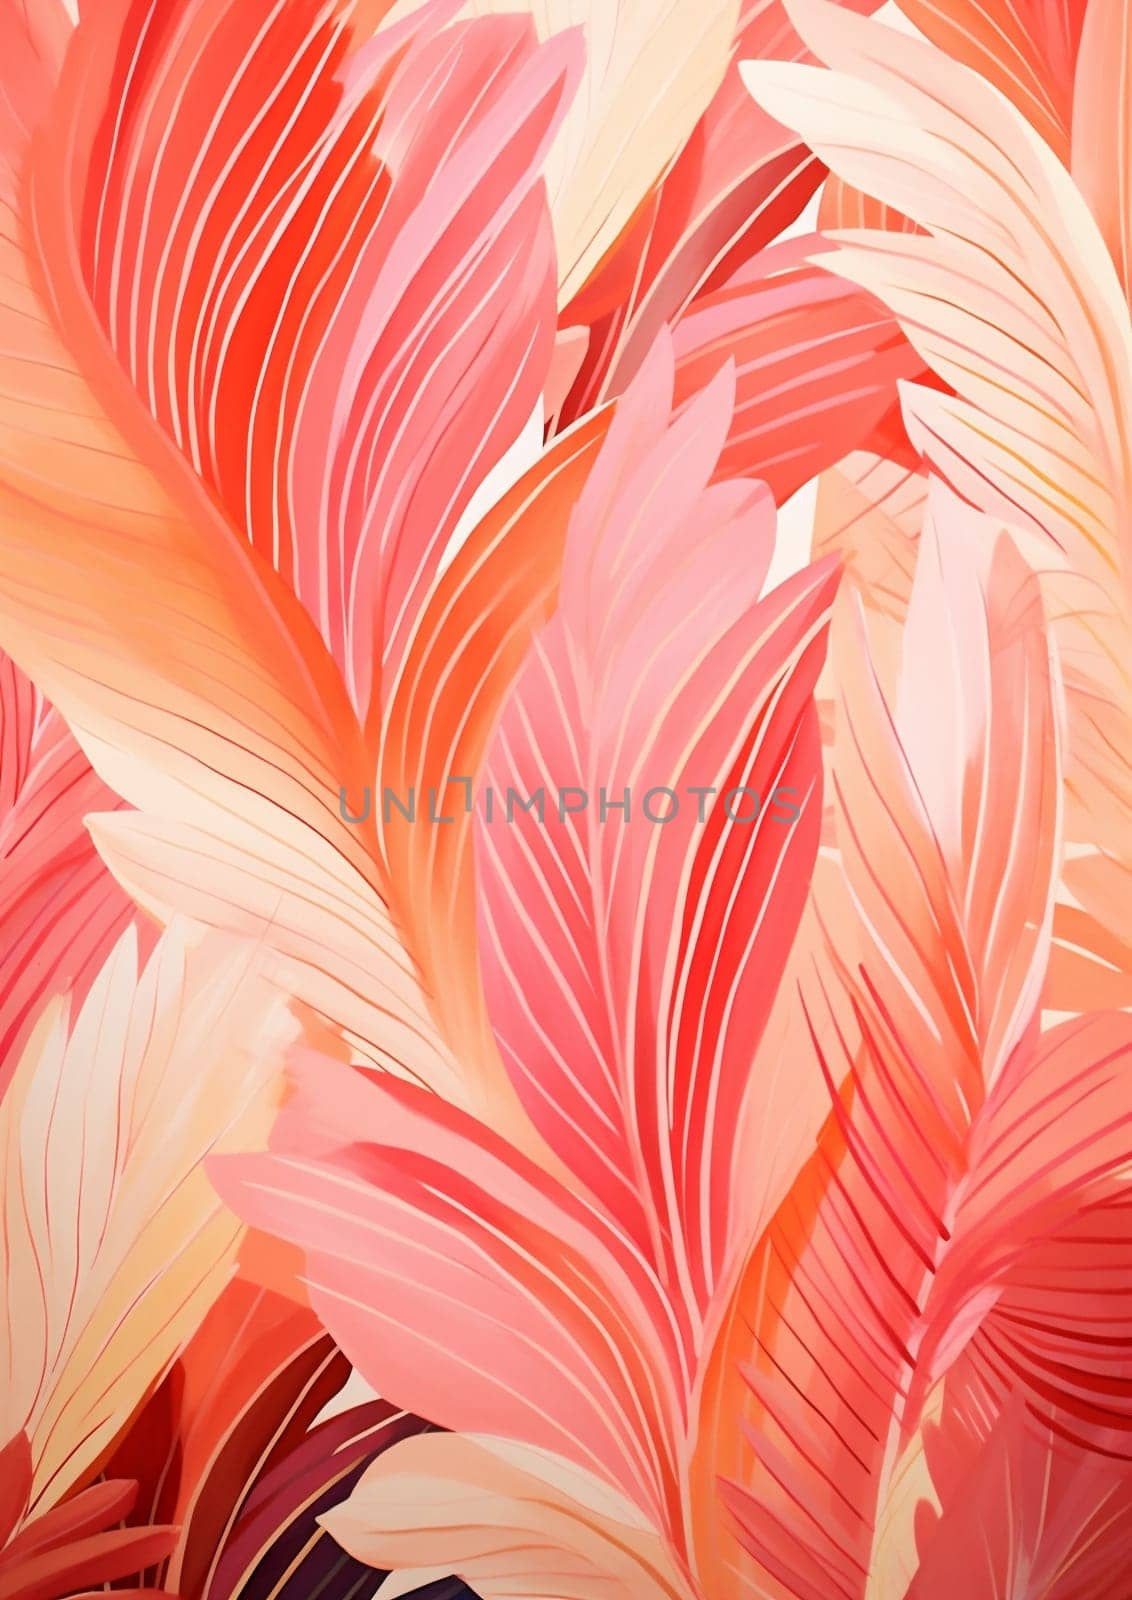 Art background pink pattern wallpaper design texture abstract by Vichizh